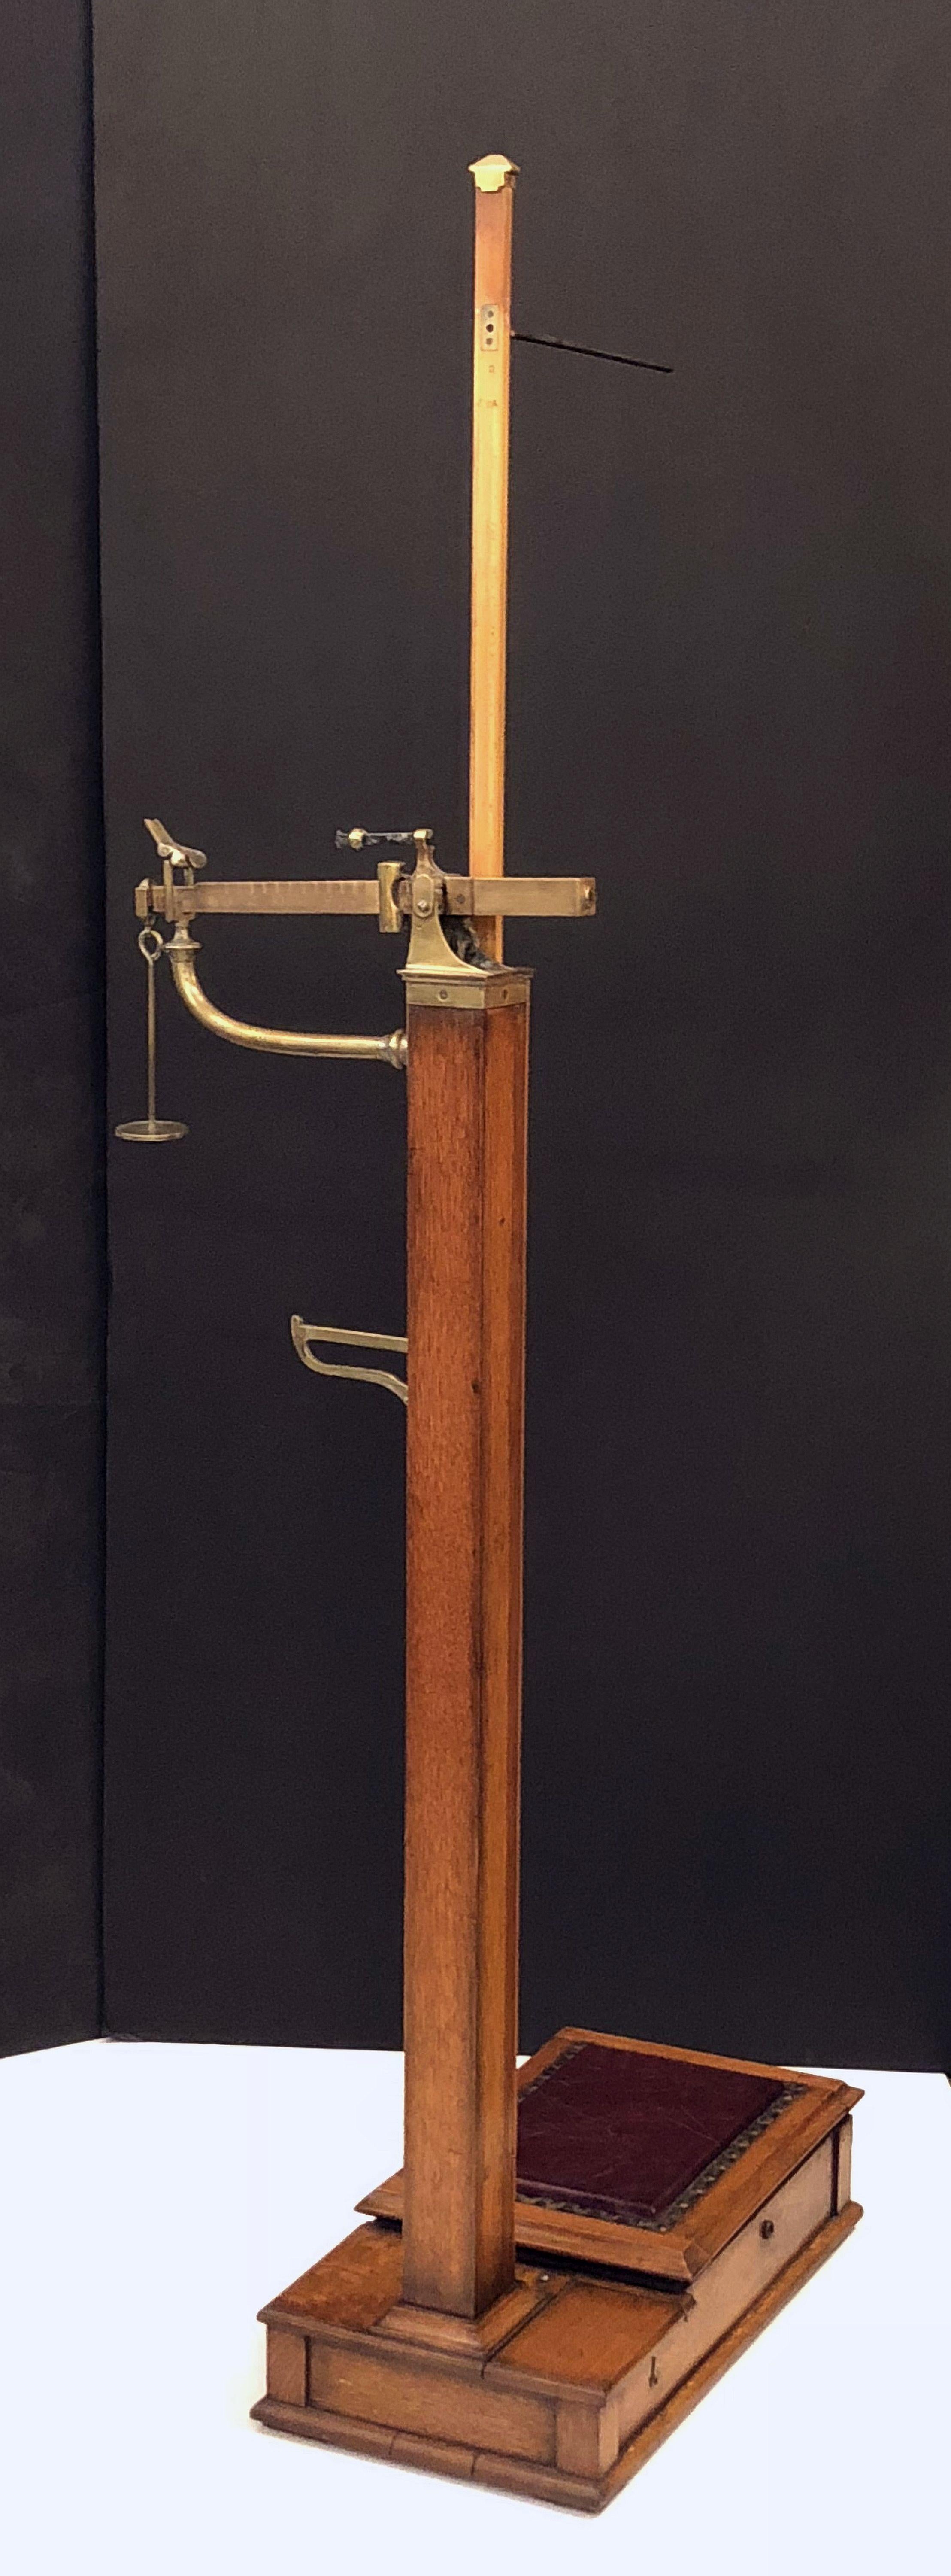 British Athlete's Personal Floor Standing Scale of Oak, Boxwood, and Brass 1